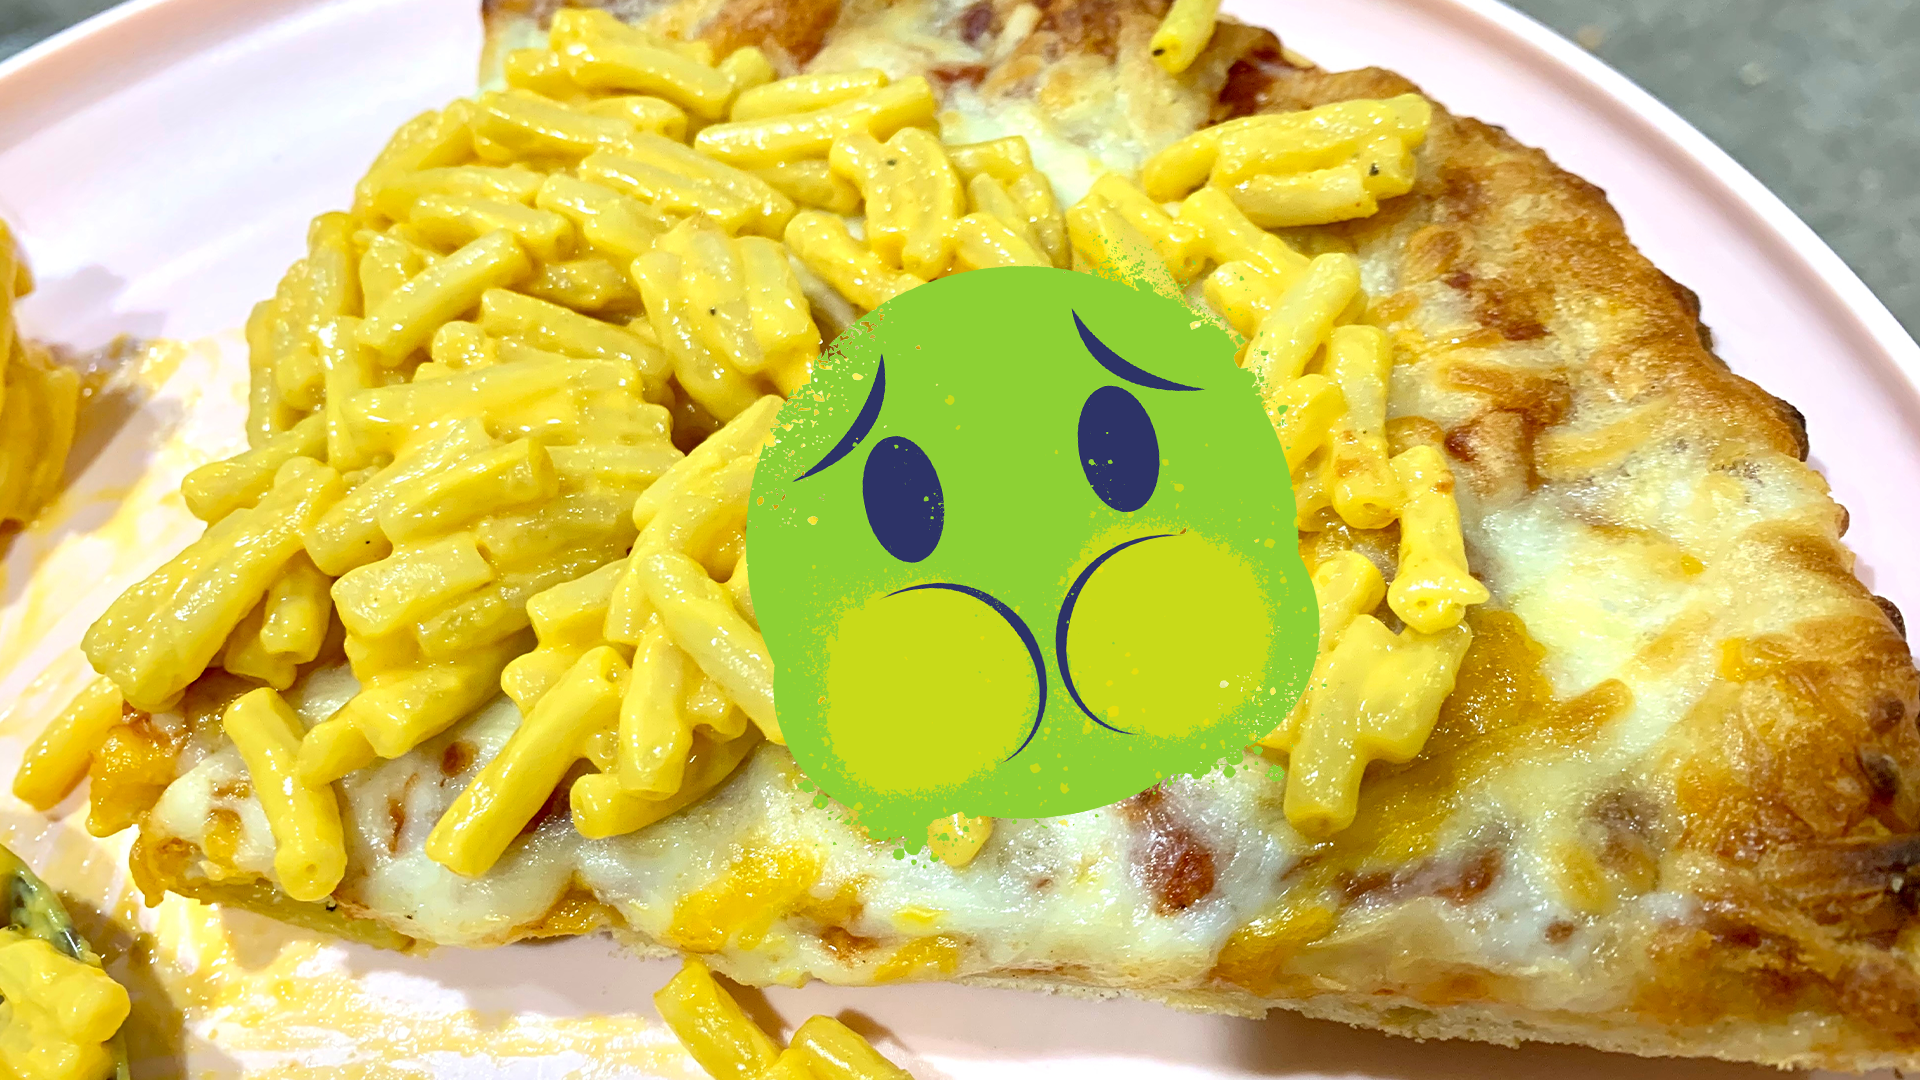 Gross looking pizza and sick emoji